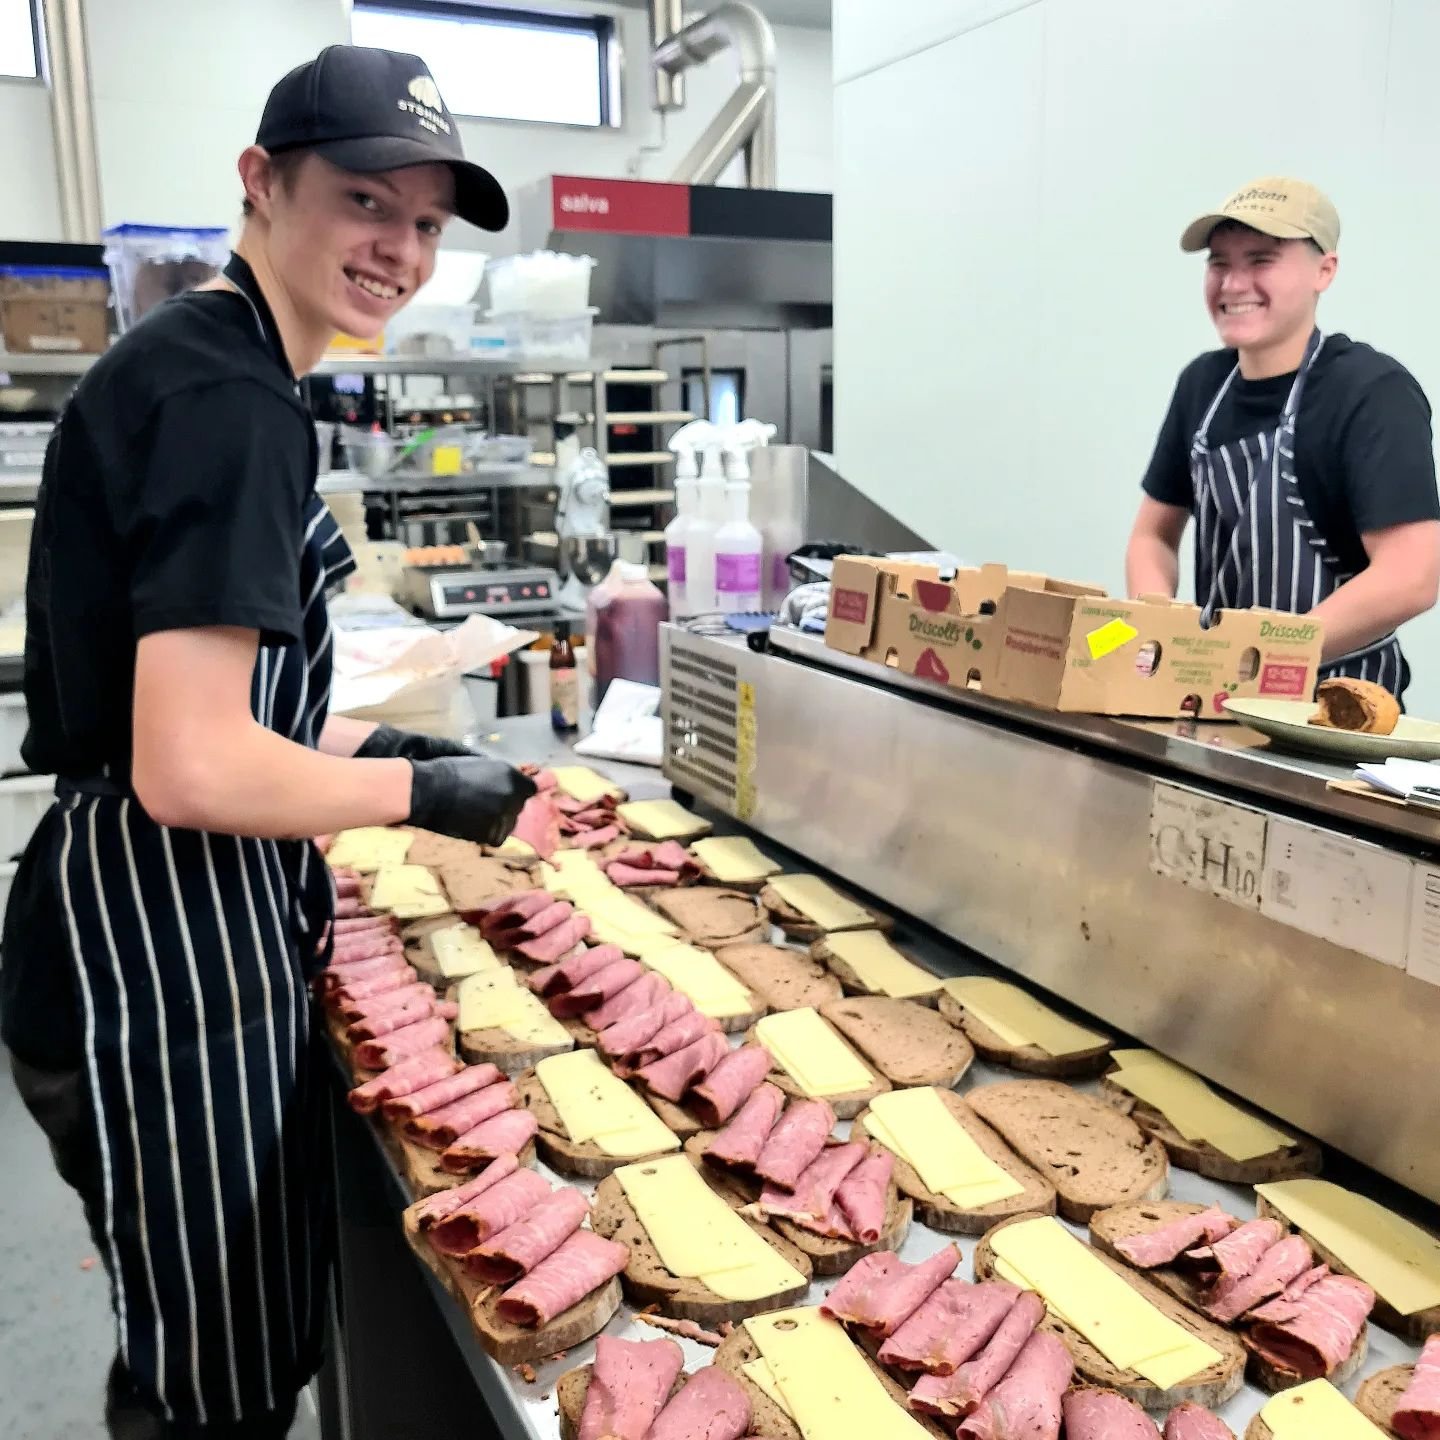 We're grateful to have a great cohort of local students to draw from to help us out during holidays and weekends... including Sam and Max, both of whom over time are becoming pros in the kitchen! Skills for life. Good luck back at school boys! We're 